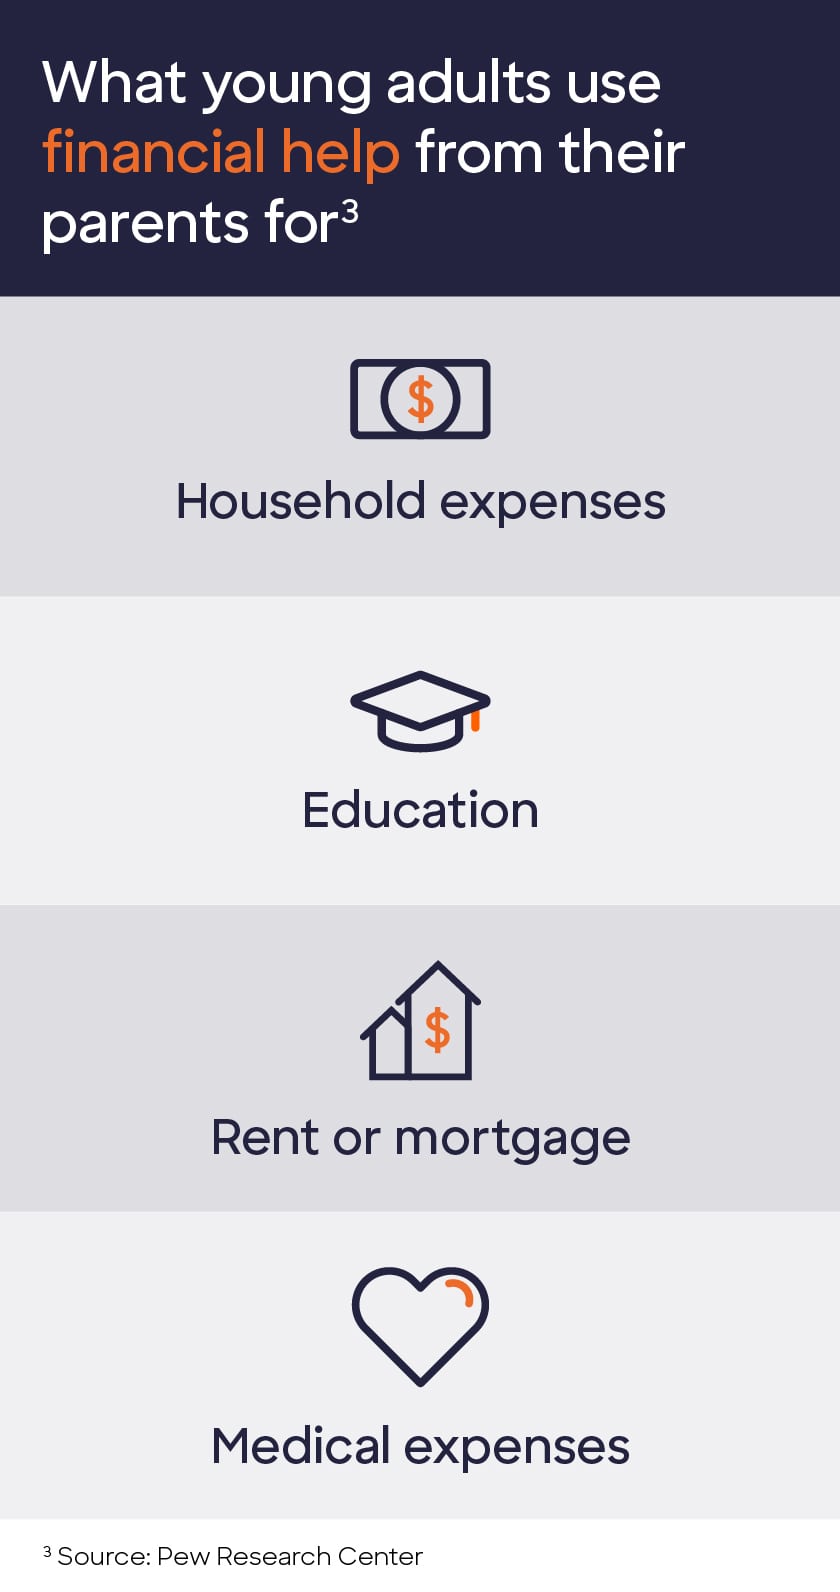 Infographic about what young adults use financial help from their parents for (household expenses, education, rent or mortgage, medical expenses).